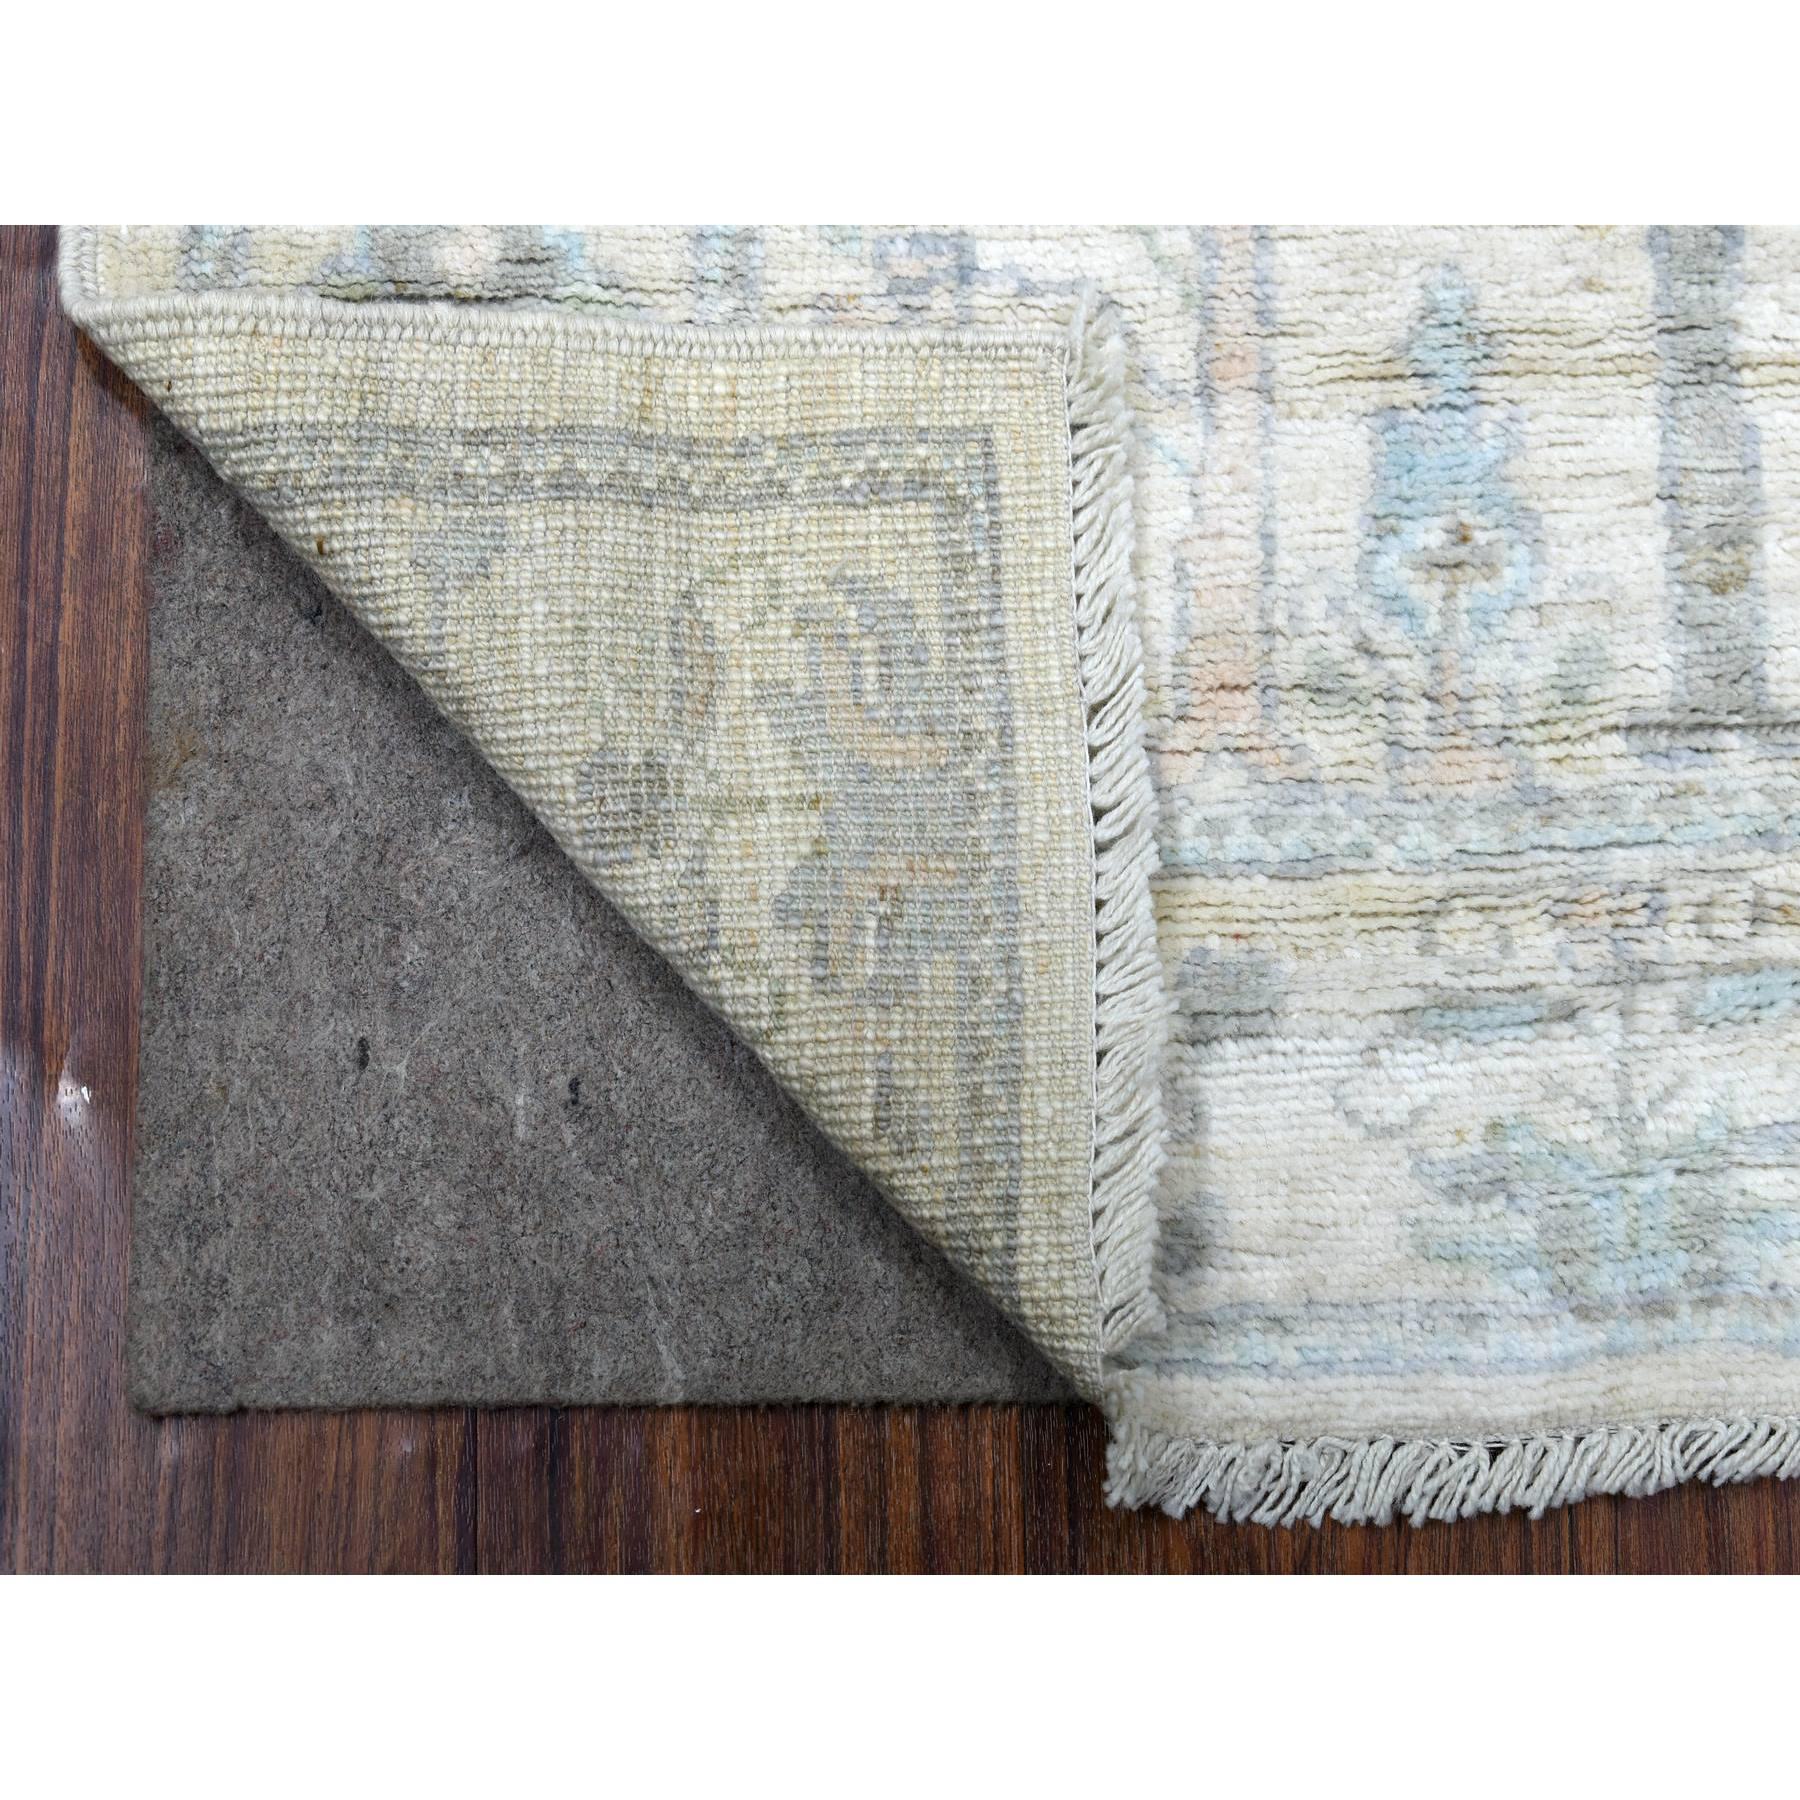 3'1"x4'4" Ivory Afghan Angora Oushak with Faded Cypress and Willow Tree Design Soft, Velvety Plush Wool Hand Woven Oriental Rug 